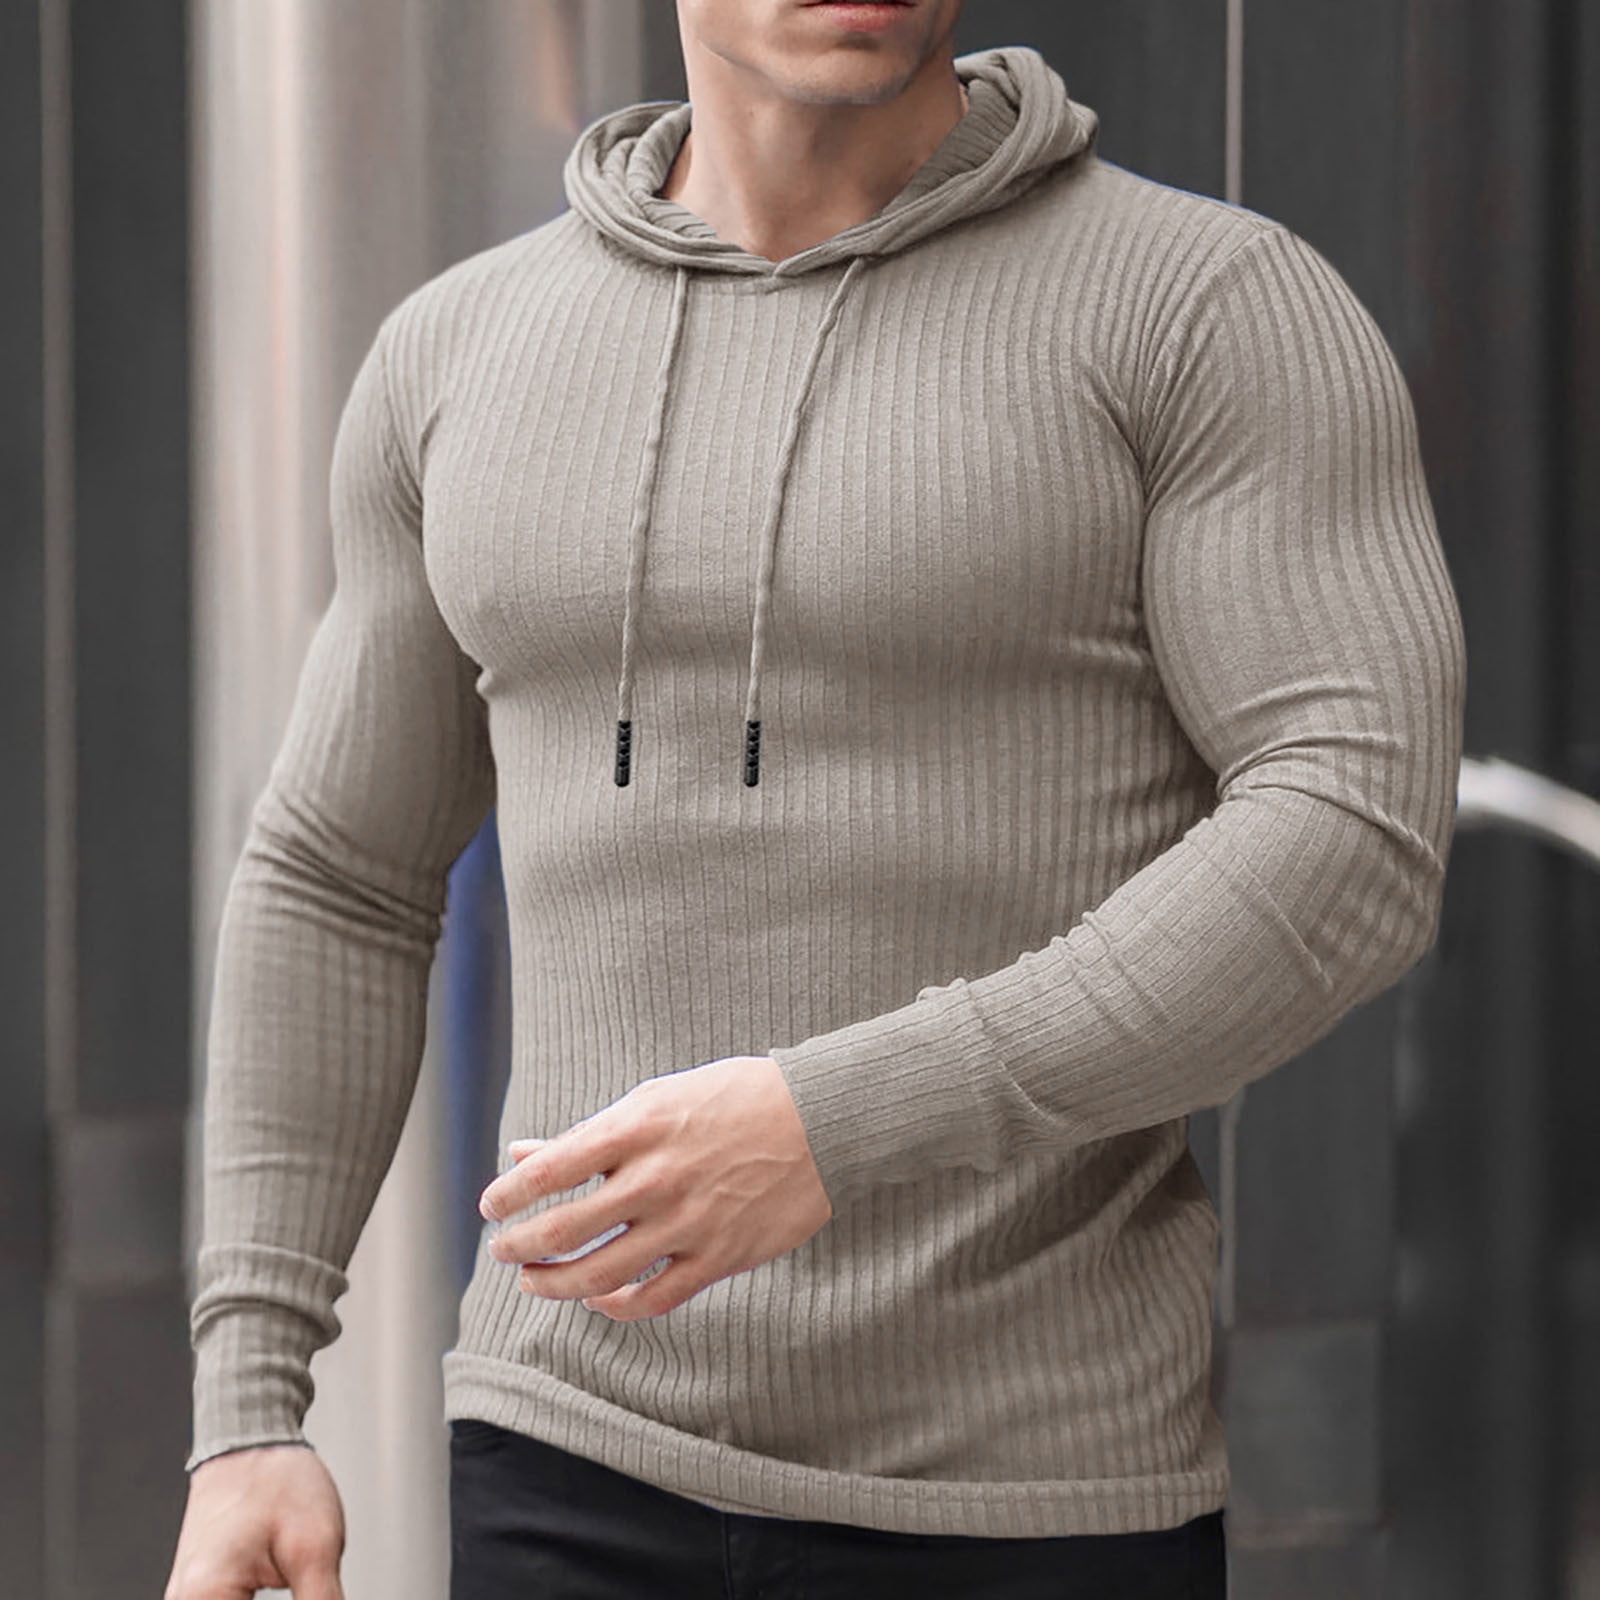 Levmjia Mens Long Sleeve Shirts Sale Men Casual Fashion Solid Tight Fitting Muscle Fitness Sports Hoodie Pullover Long Sleeved Sweatshirts, Men's